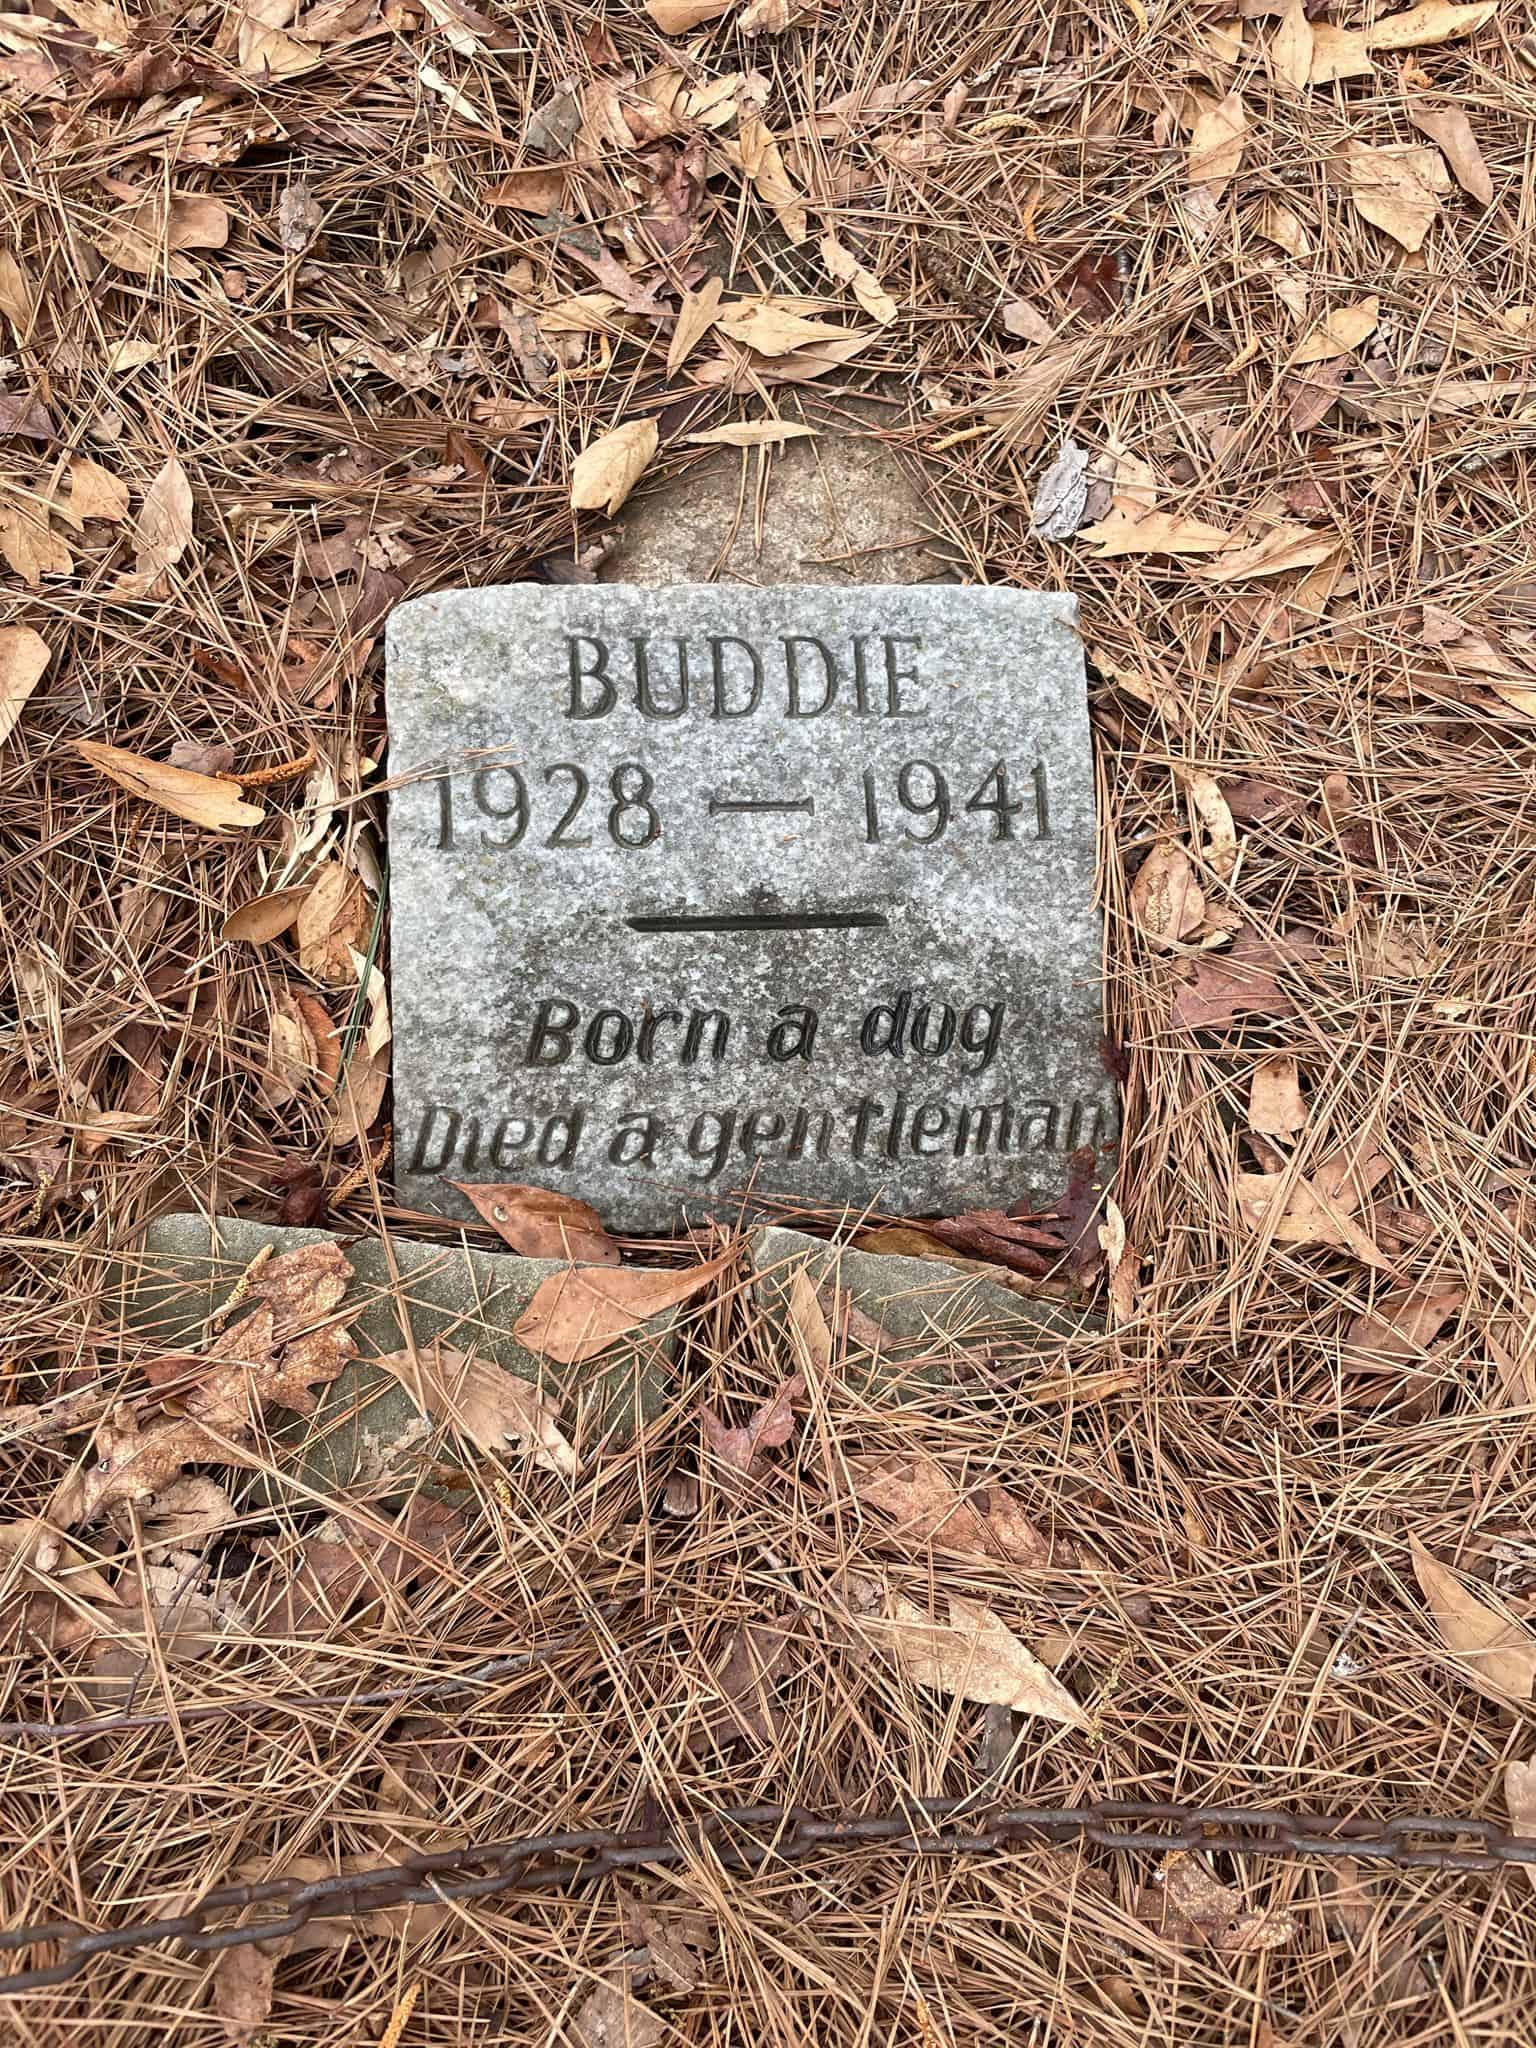 photo of buddie the dog's grave